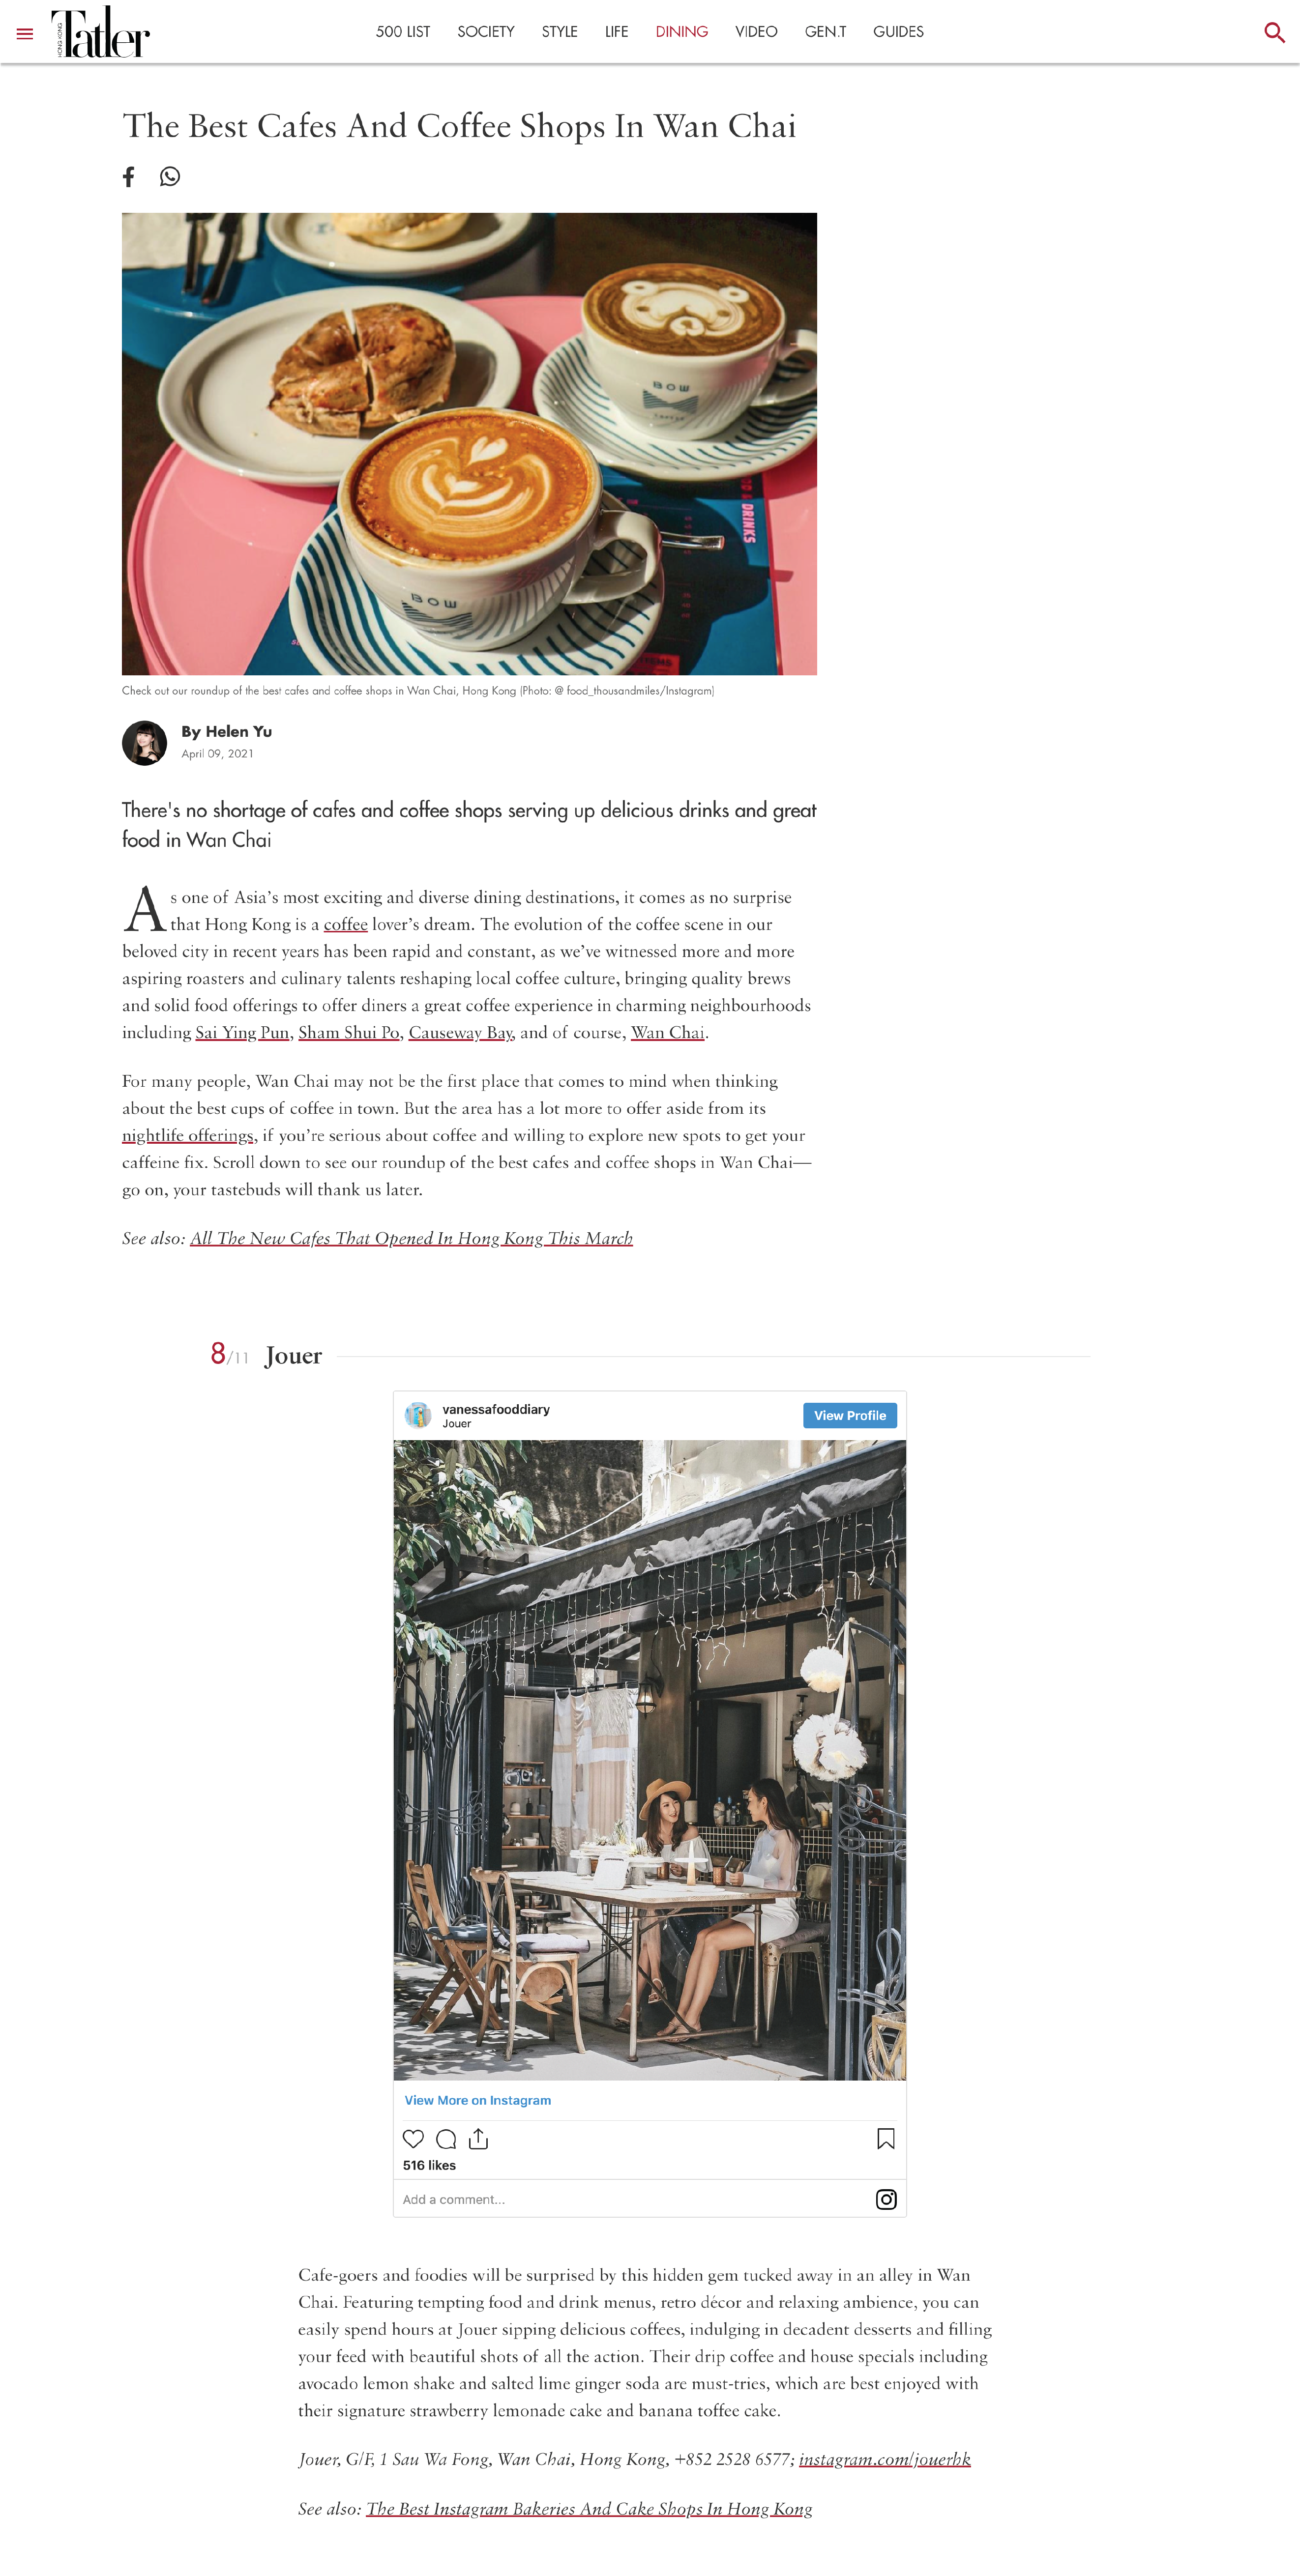 tatler_The Best Cafes And Coffee Shops In Wan Chai-01